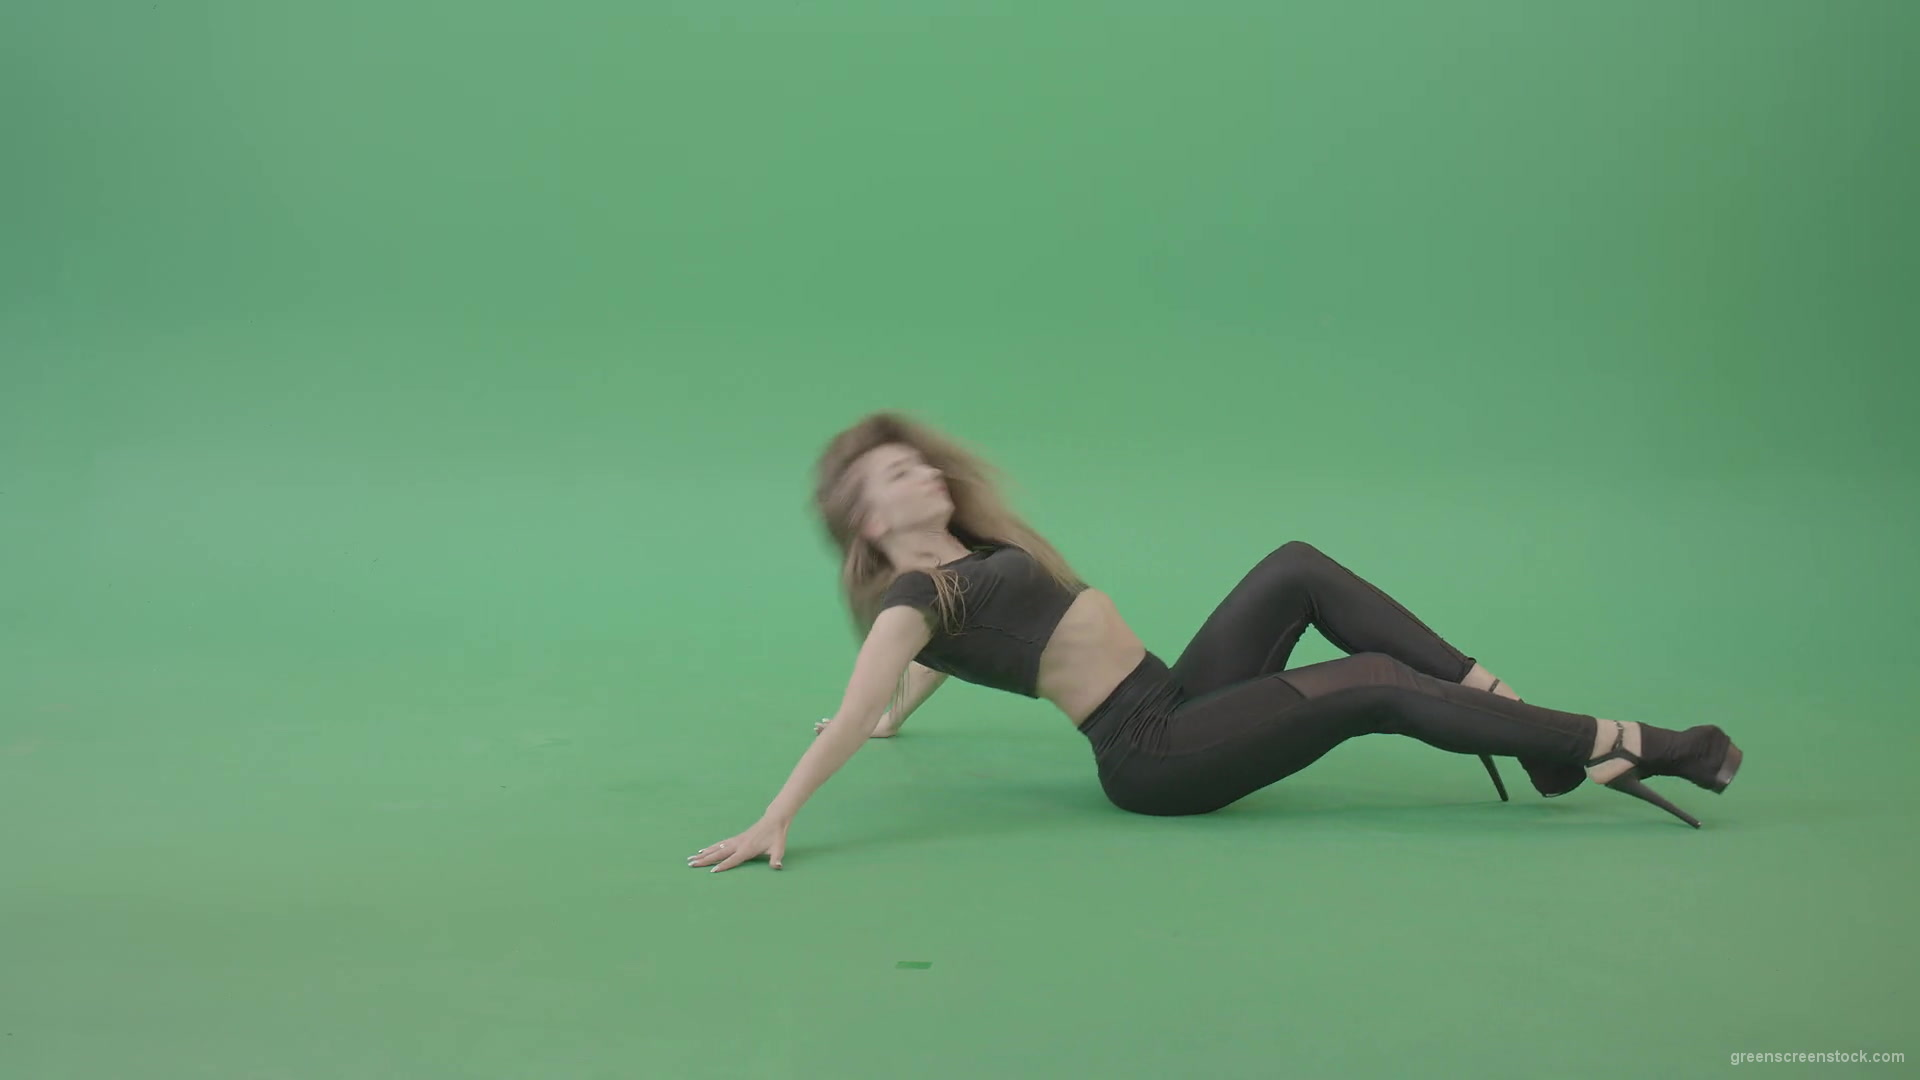 Exotic-erotic-dancing-girl-on-green-screen-play-Doggy-Style-4K-Video-Footage-1920_005 Green Screen Stock